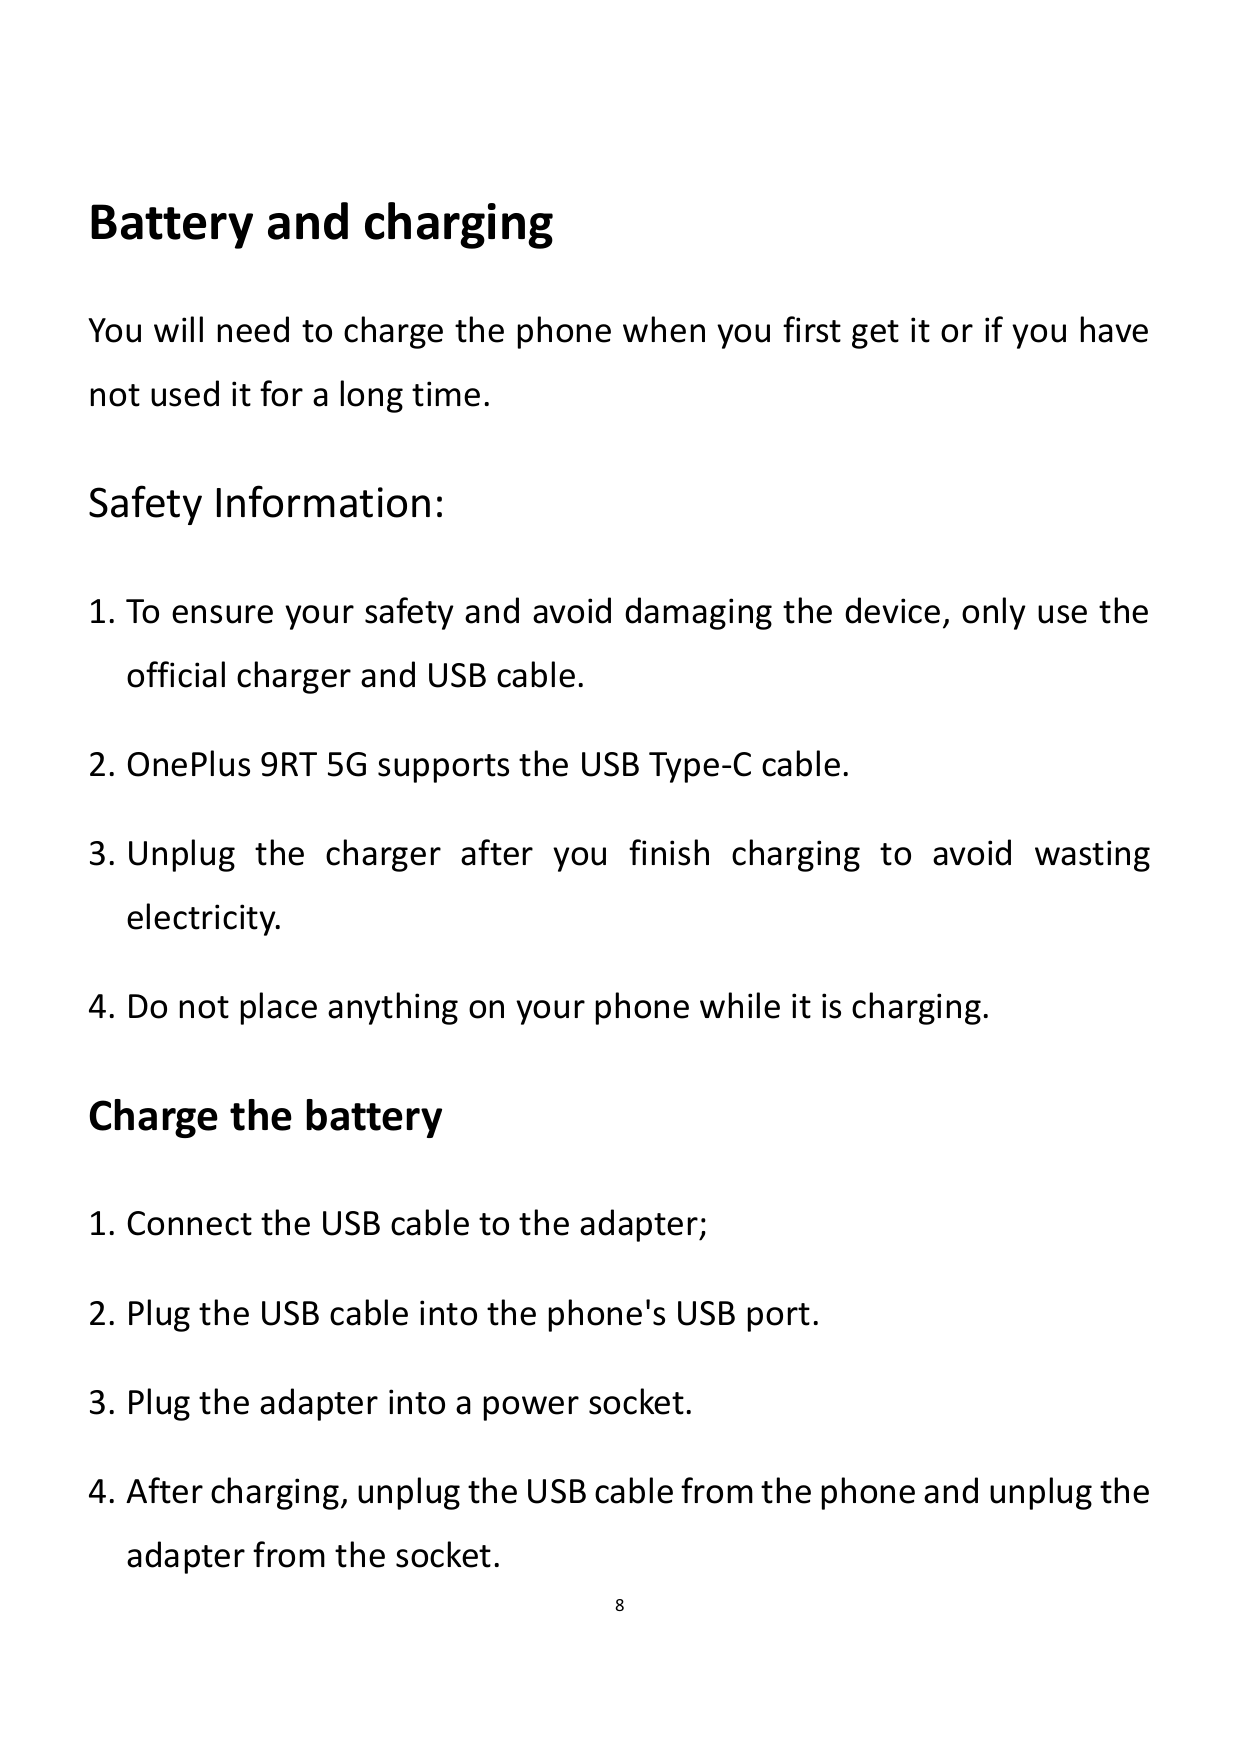 Battery and chargingYou will need to charge the phone when you first get it or if you havenot used it for a long time.Safety Inf